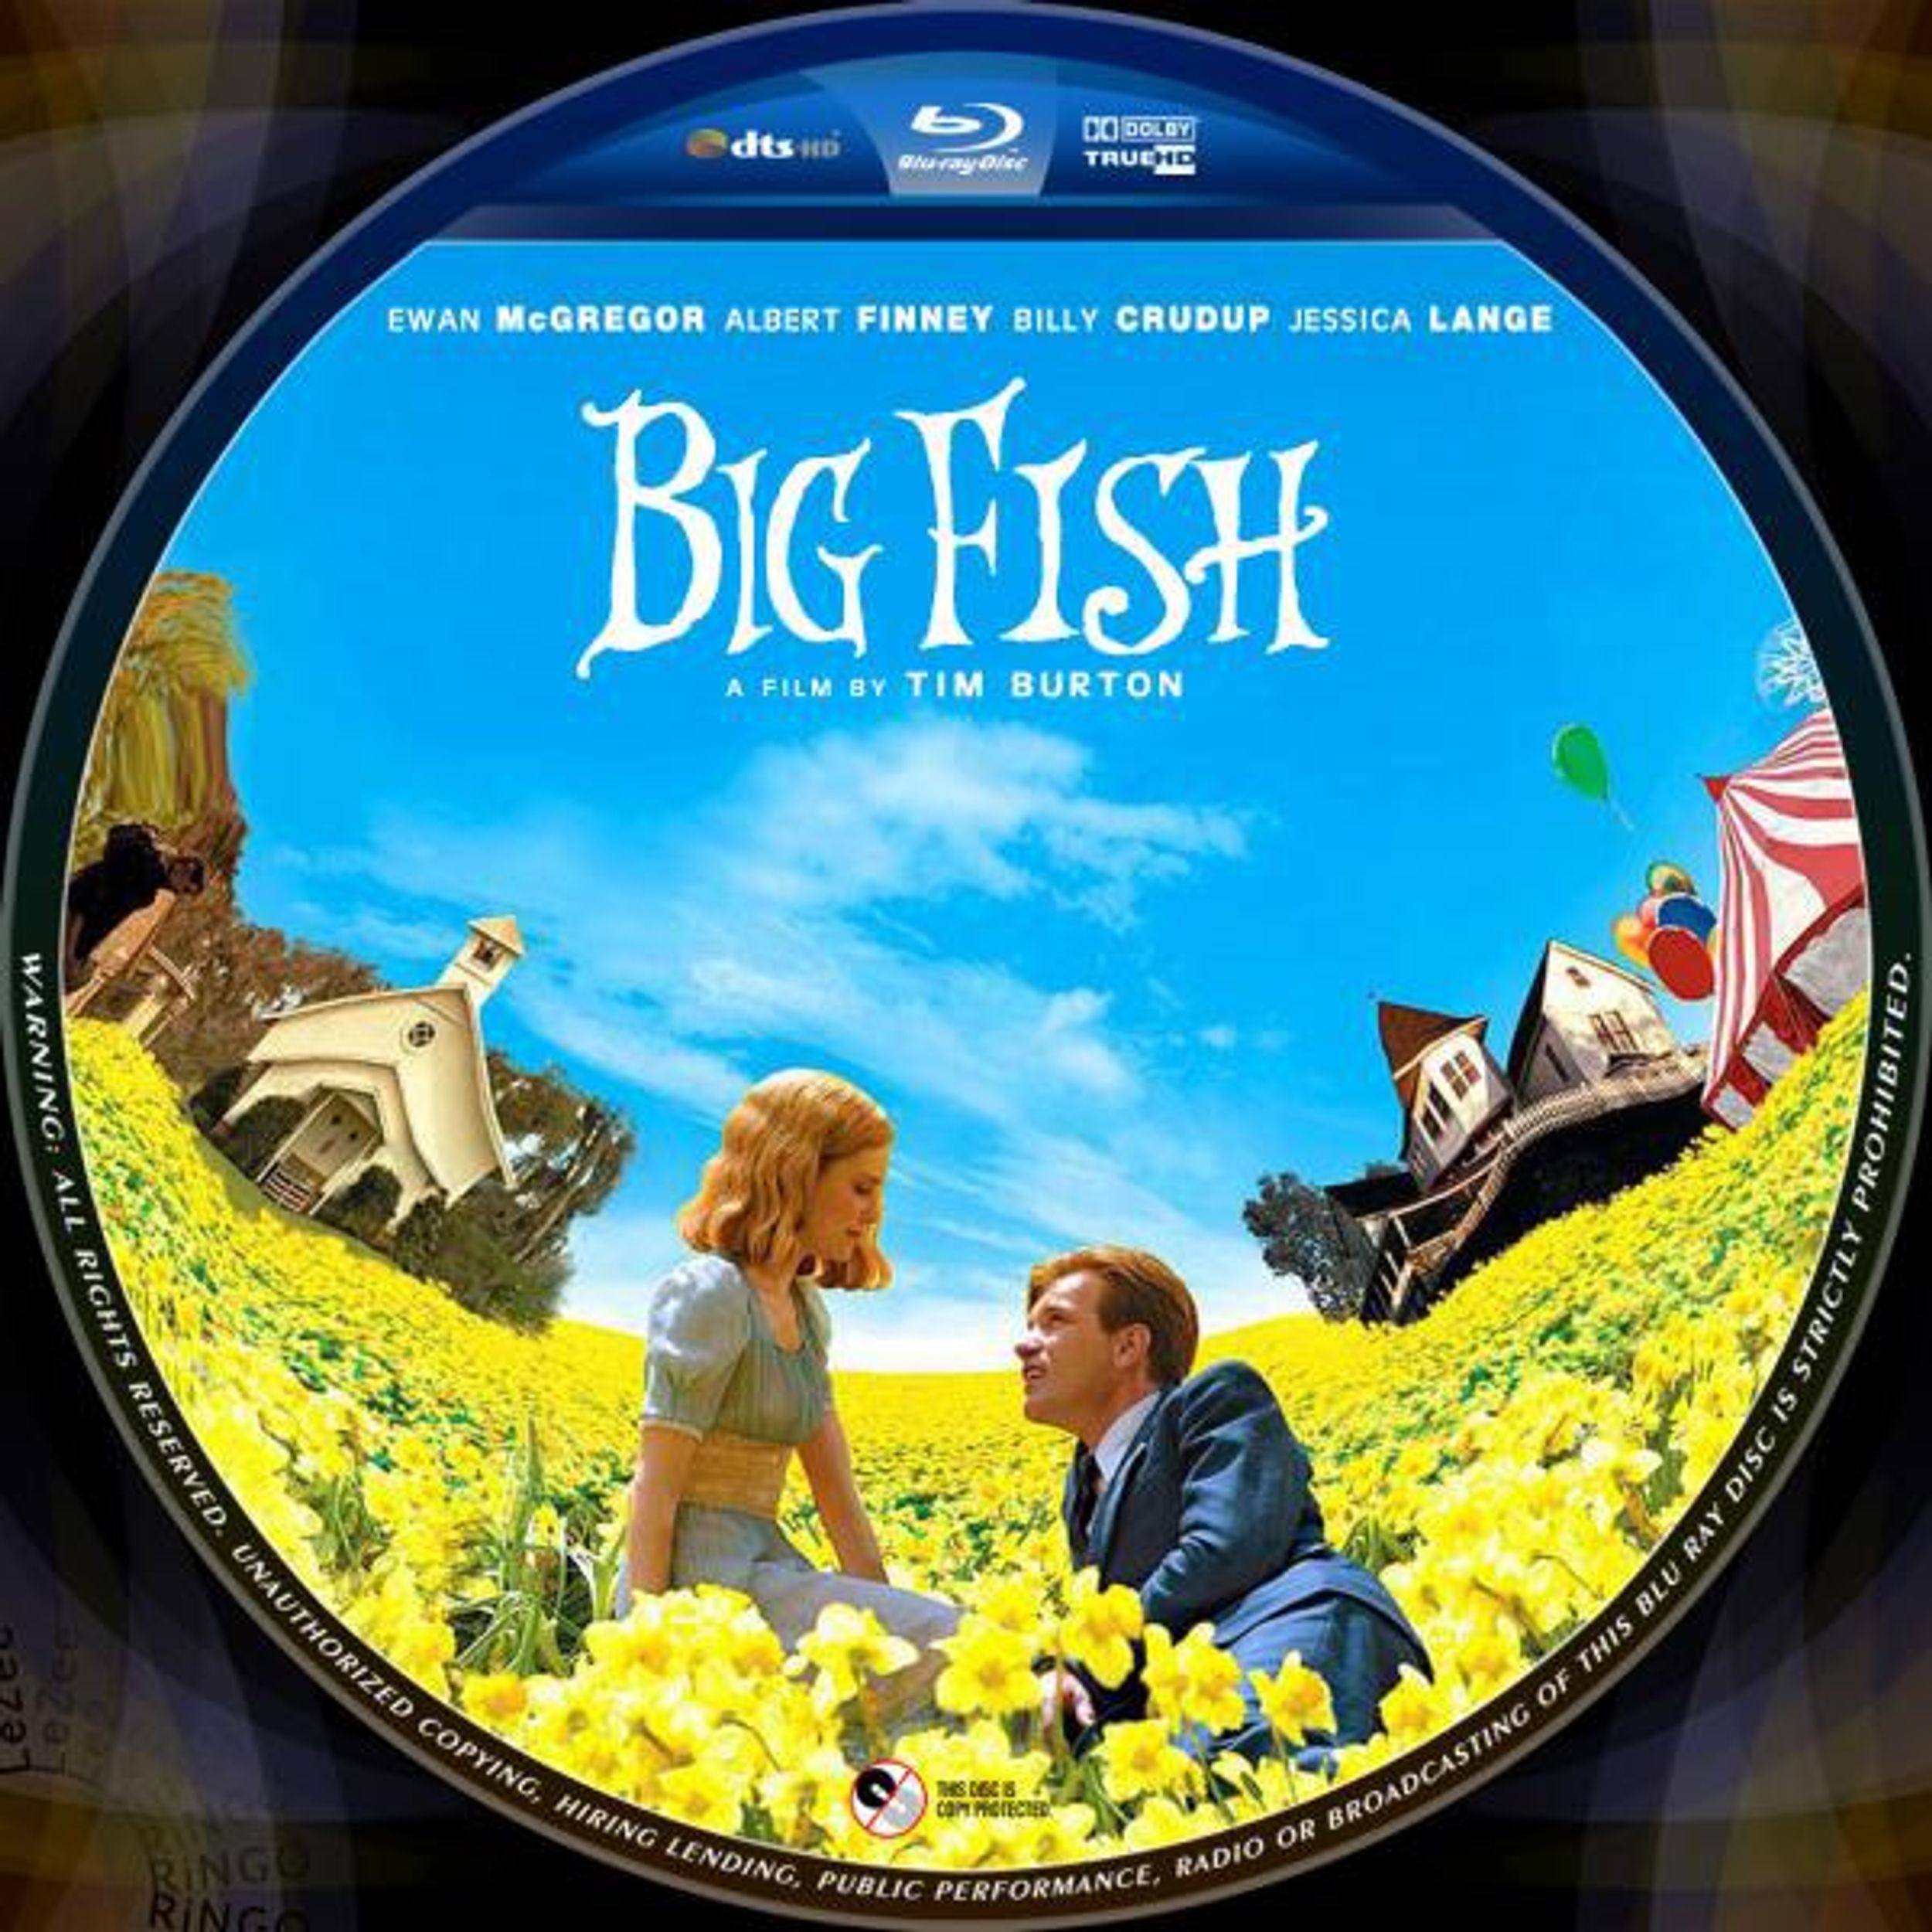 "Big Fish" Created From A Big Imagination